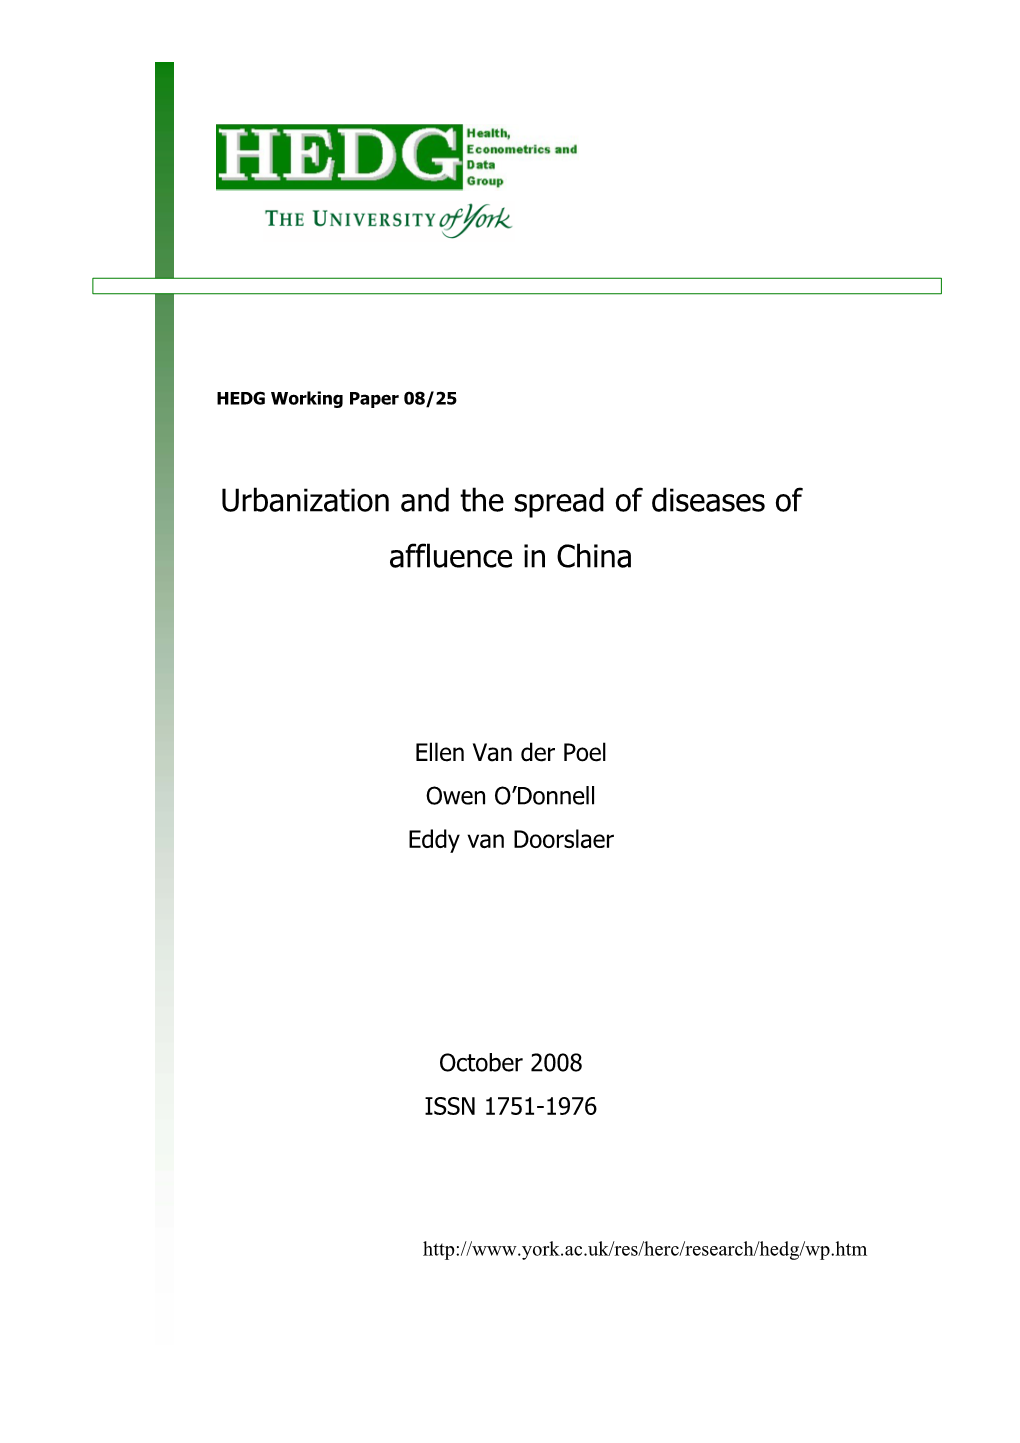 Urbanization and the Spread of Diseases of Affluence in China